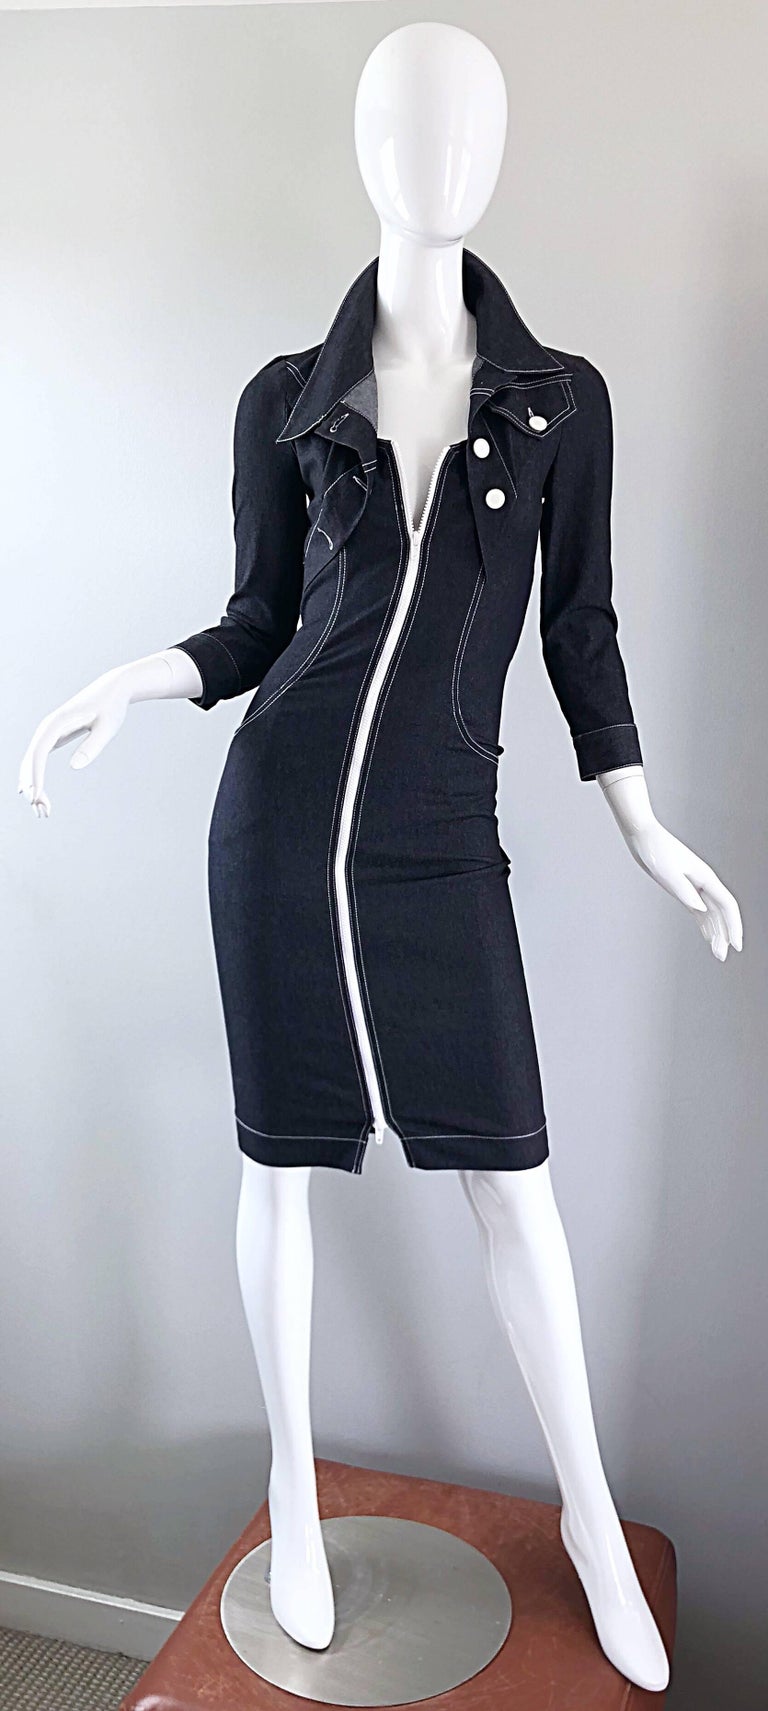 Amazing sexy in all the right ways early 1990s ANGELO TARLAZZI 'faux bolero' bodycon denim dress! Features a soft cotton denim / elastane fabric that stretches to fit. Attached bolero jacket has a unique asymmetrical collar. Full white zipper up the